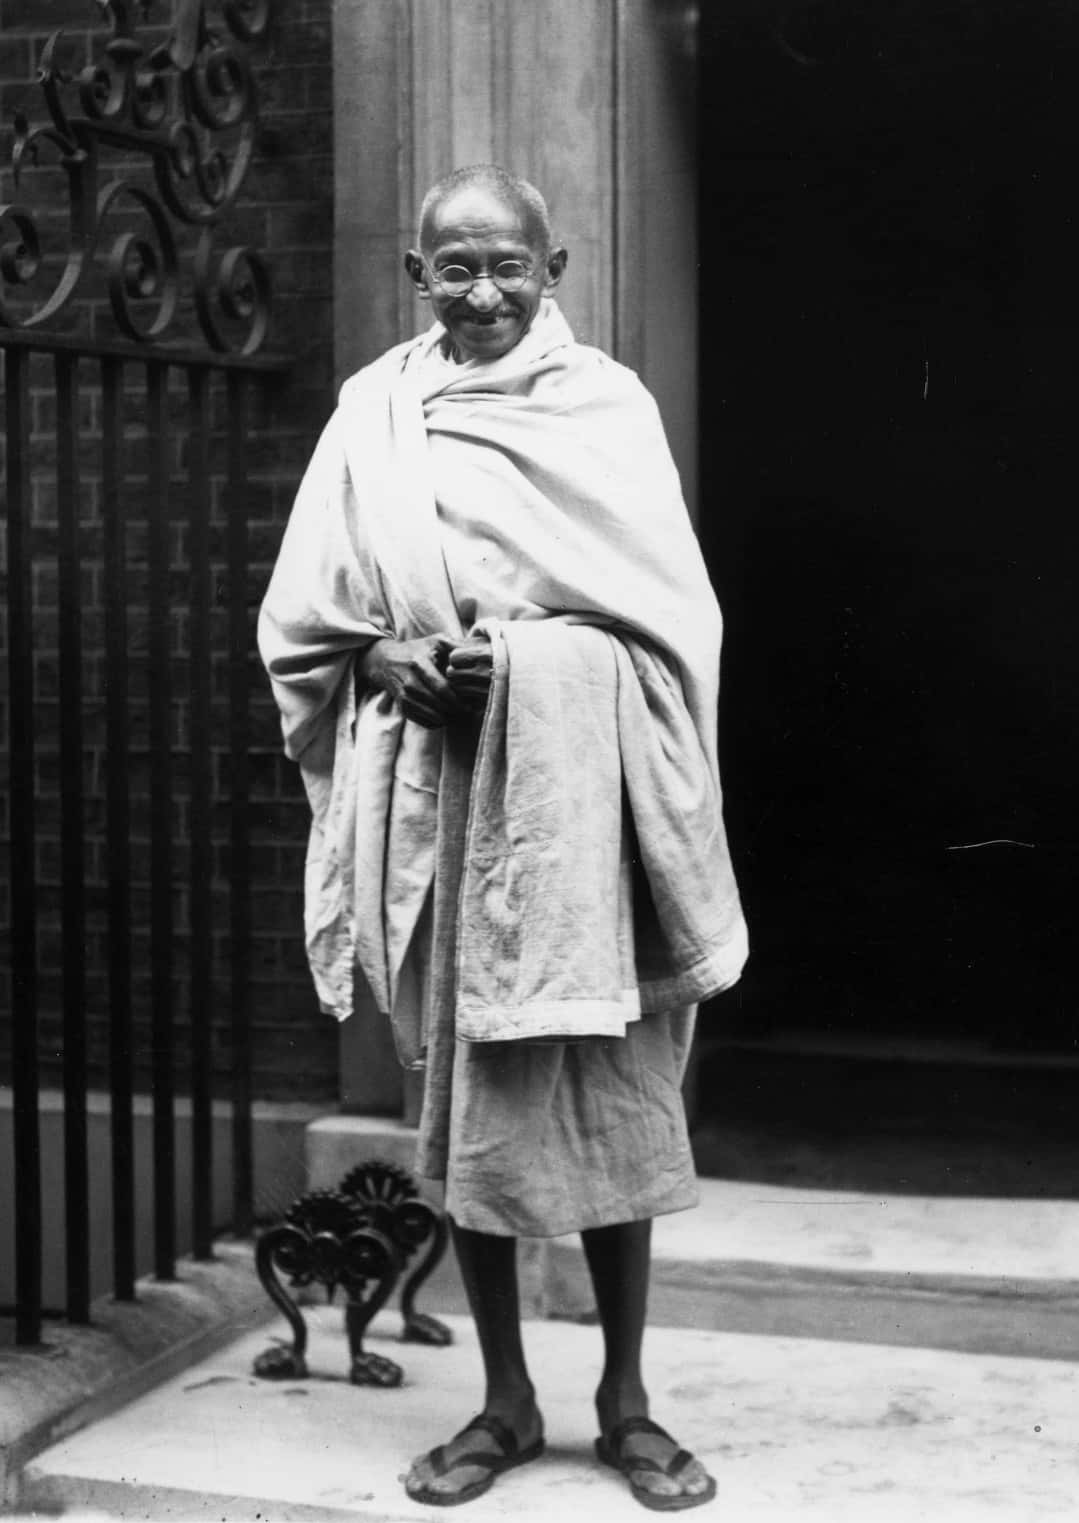 Mahatma Gandhi stands for peace and justice